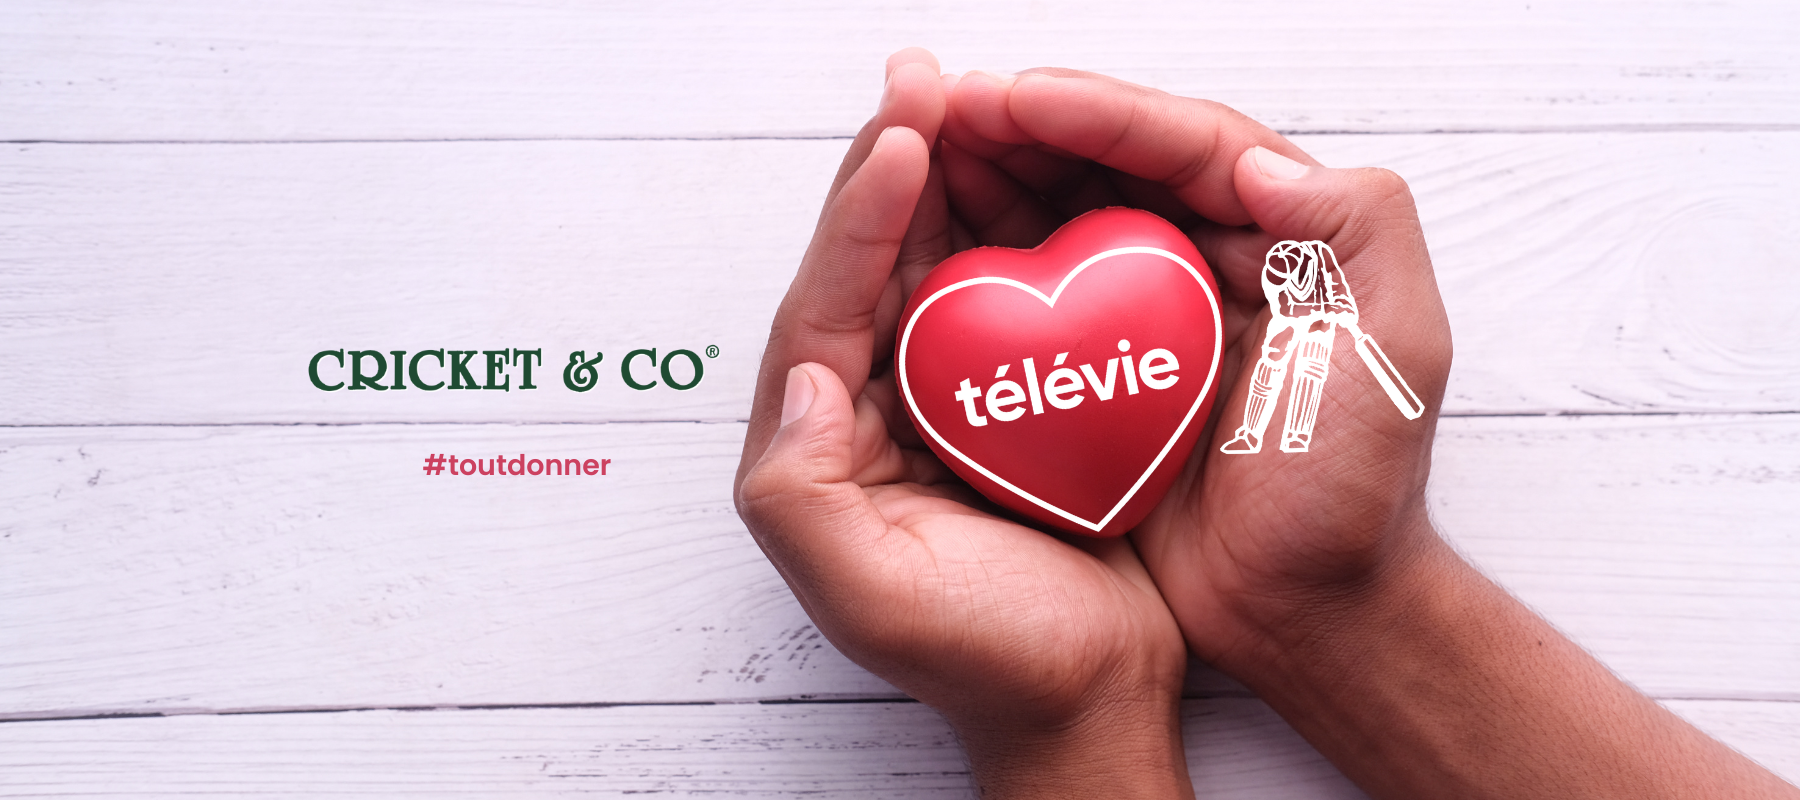 Cricket & Co supports Télévie with you !